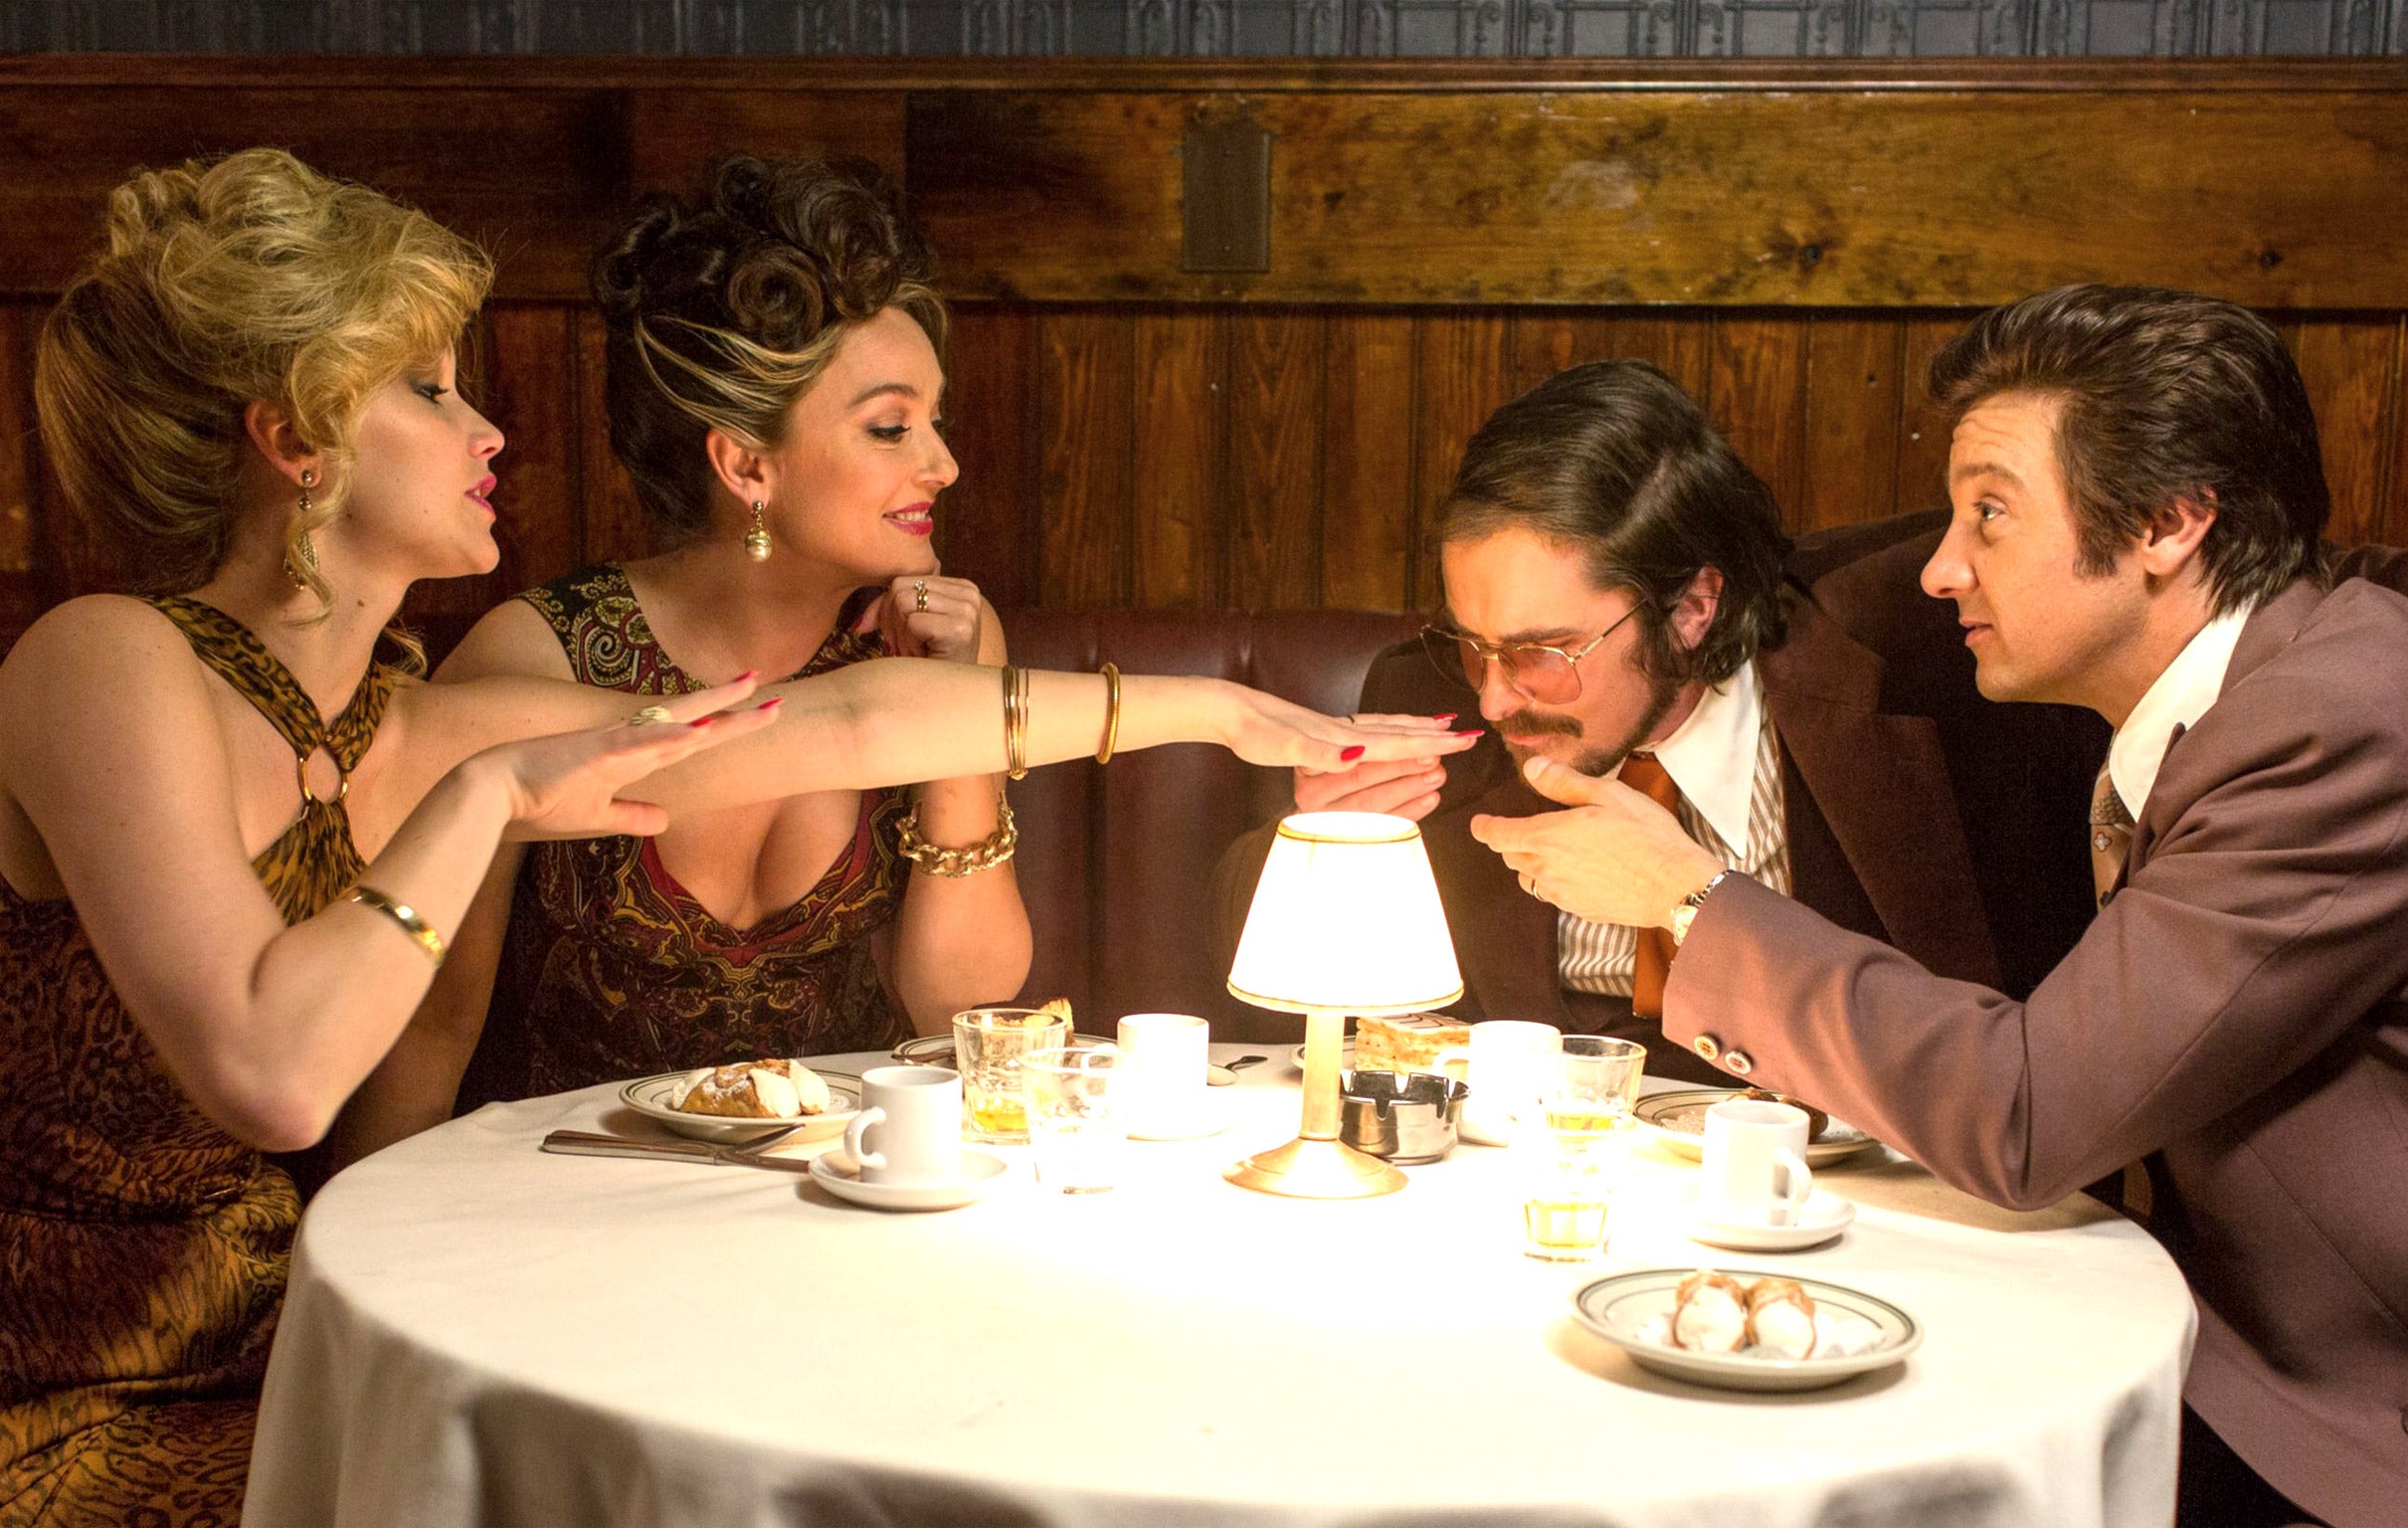 ‘American Hustle’ passed the Bechdel Test, but only because of one scene